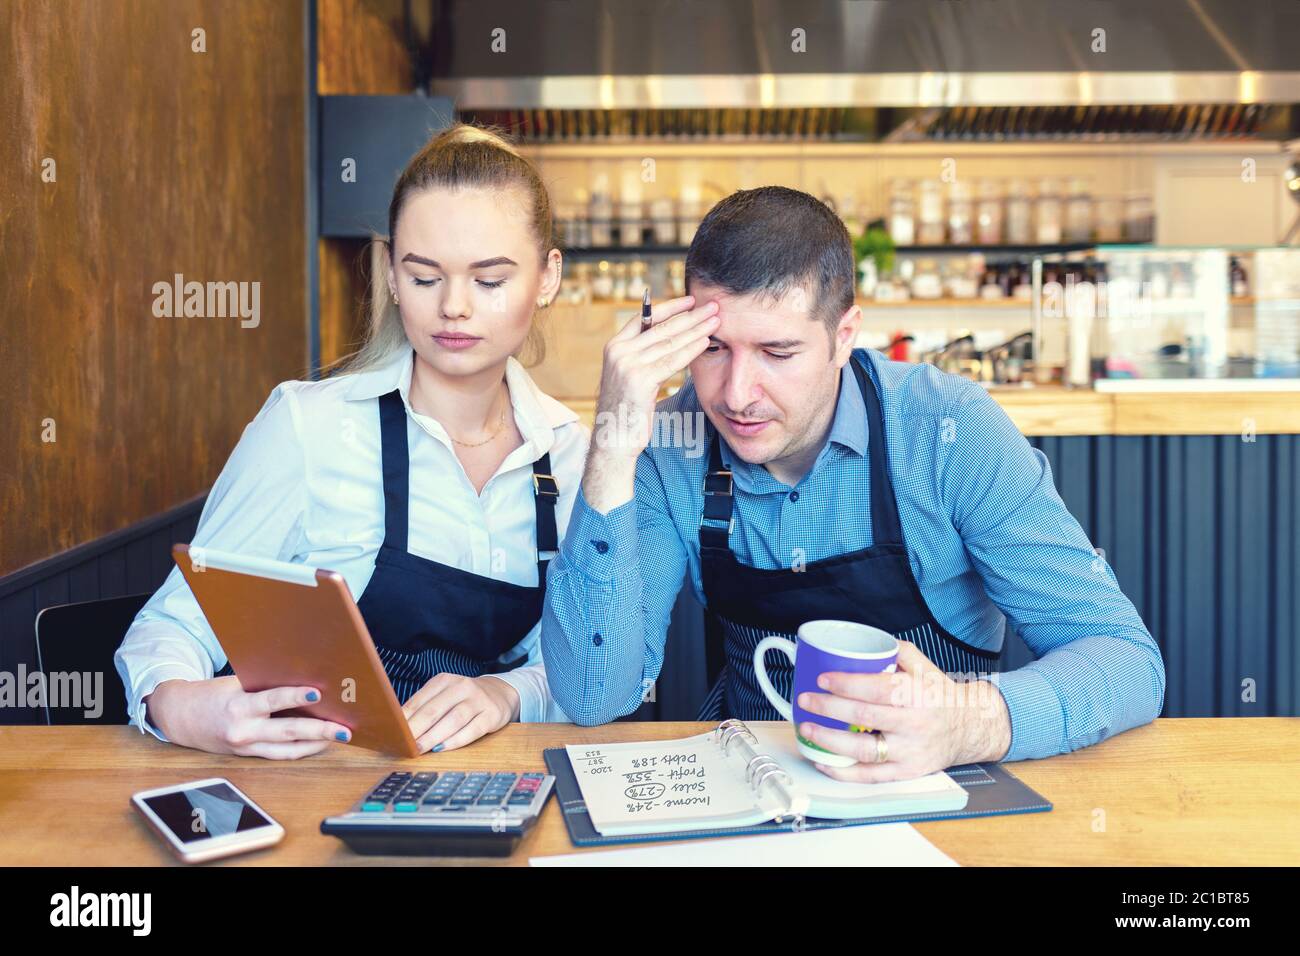 Mature new small business owners calculating online restaurant bill expenses and taxes Stock Photo